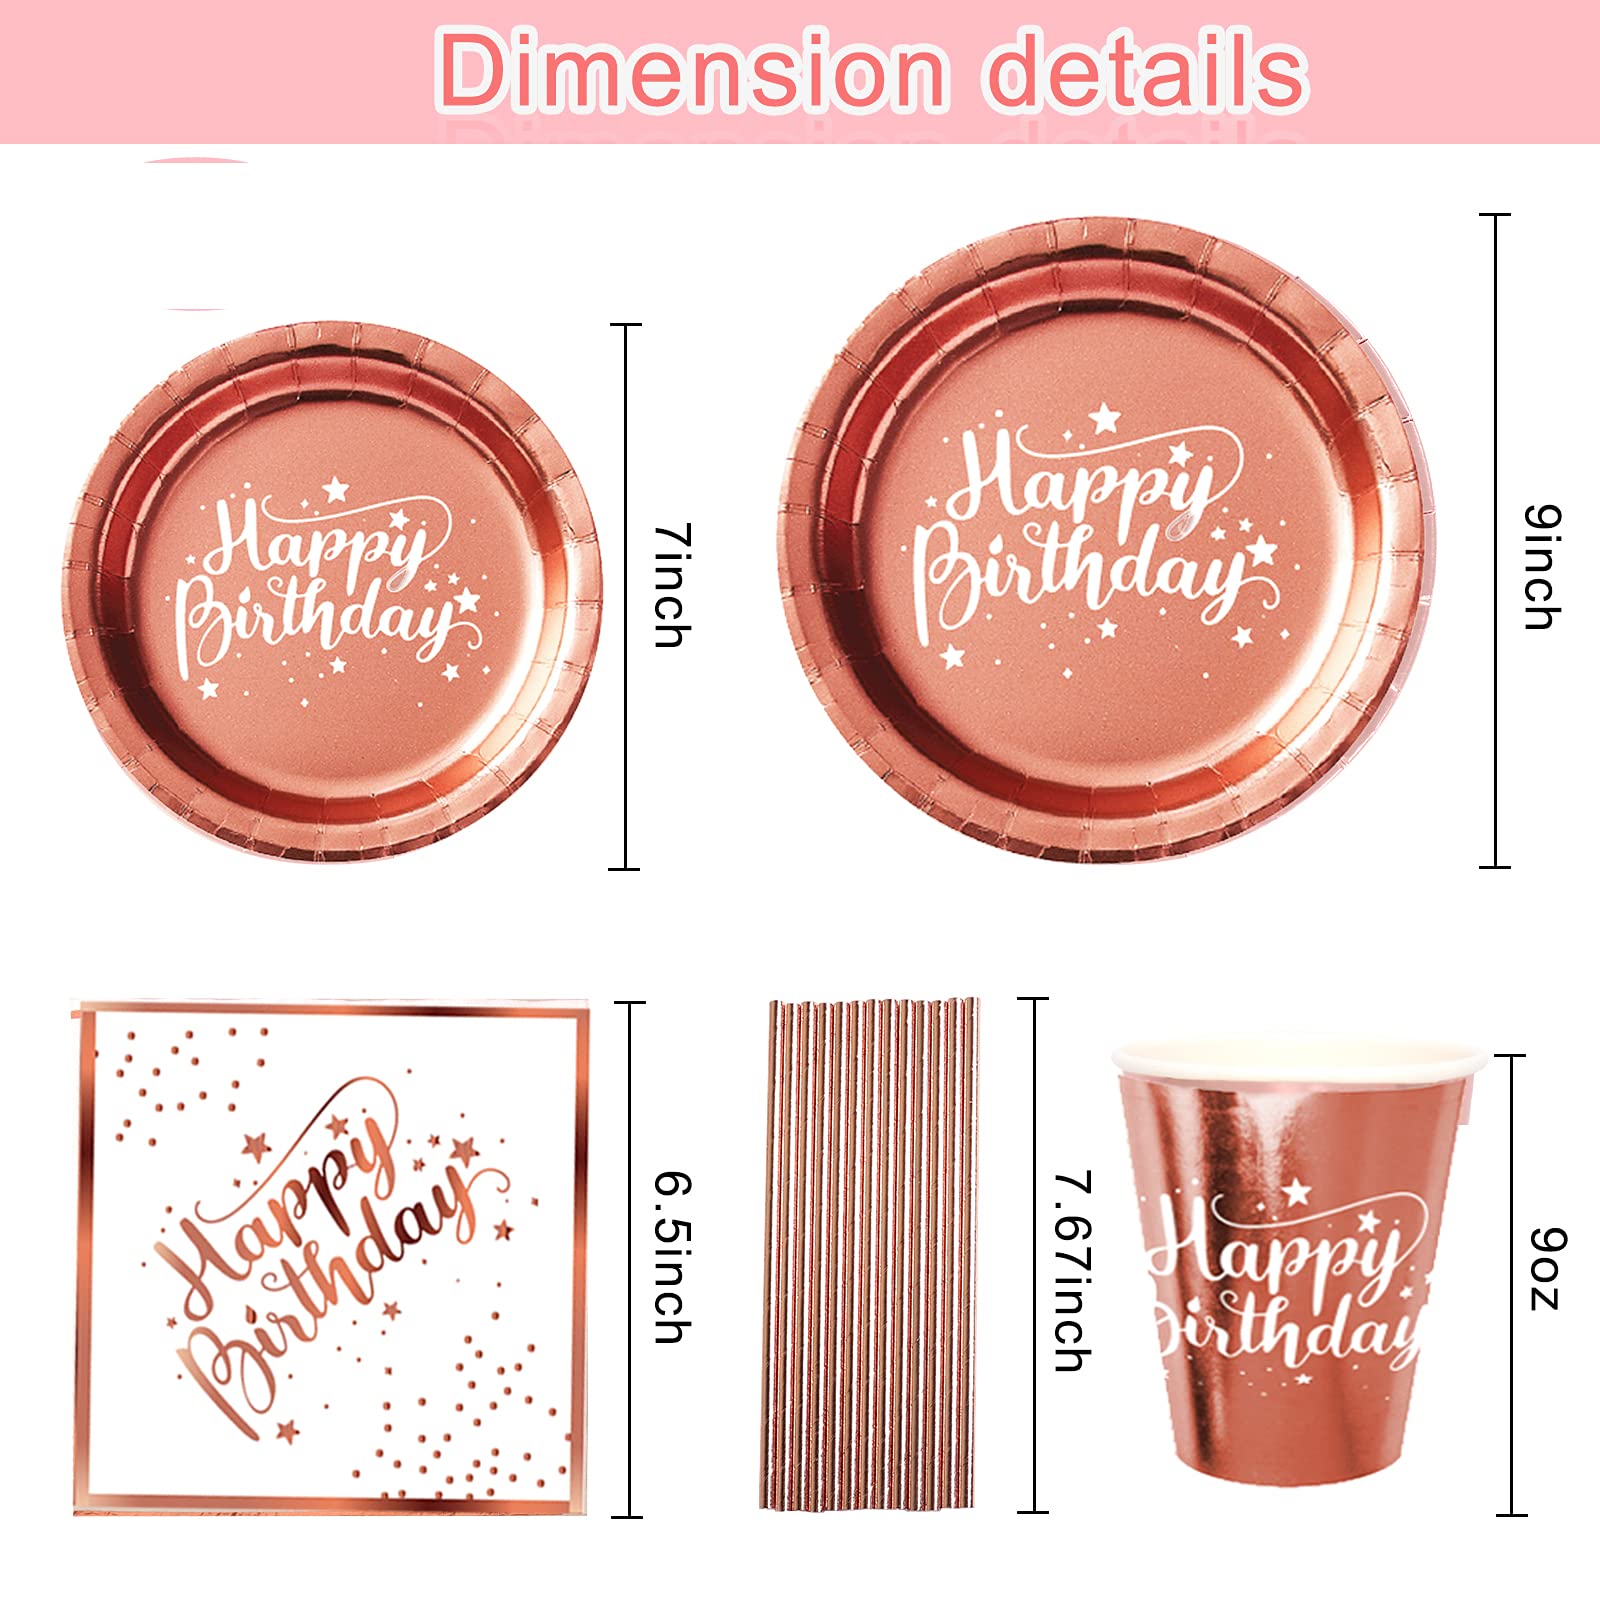 Rose Gold Birthday Party Decorations, Rose Gold Party Decorations Set for Girls Or Women, Happy Birthday Banner, Curtains, Table Runner, Balloons, Plates, Cups, Tissue for 24 Guest by JSN PARTY